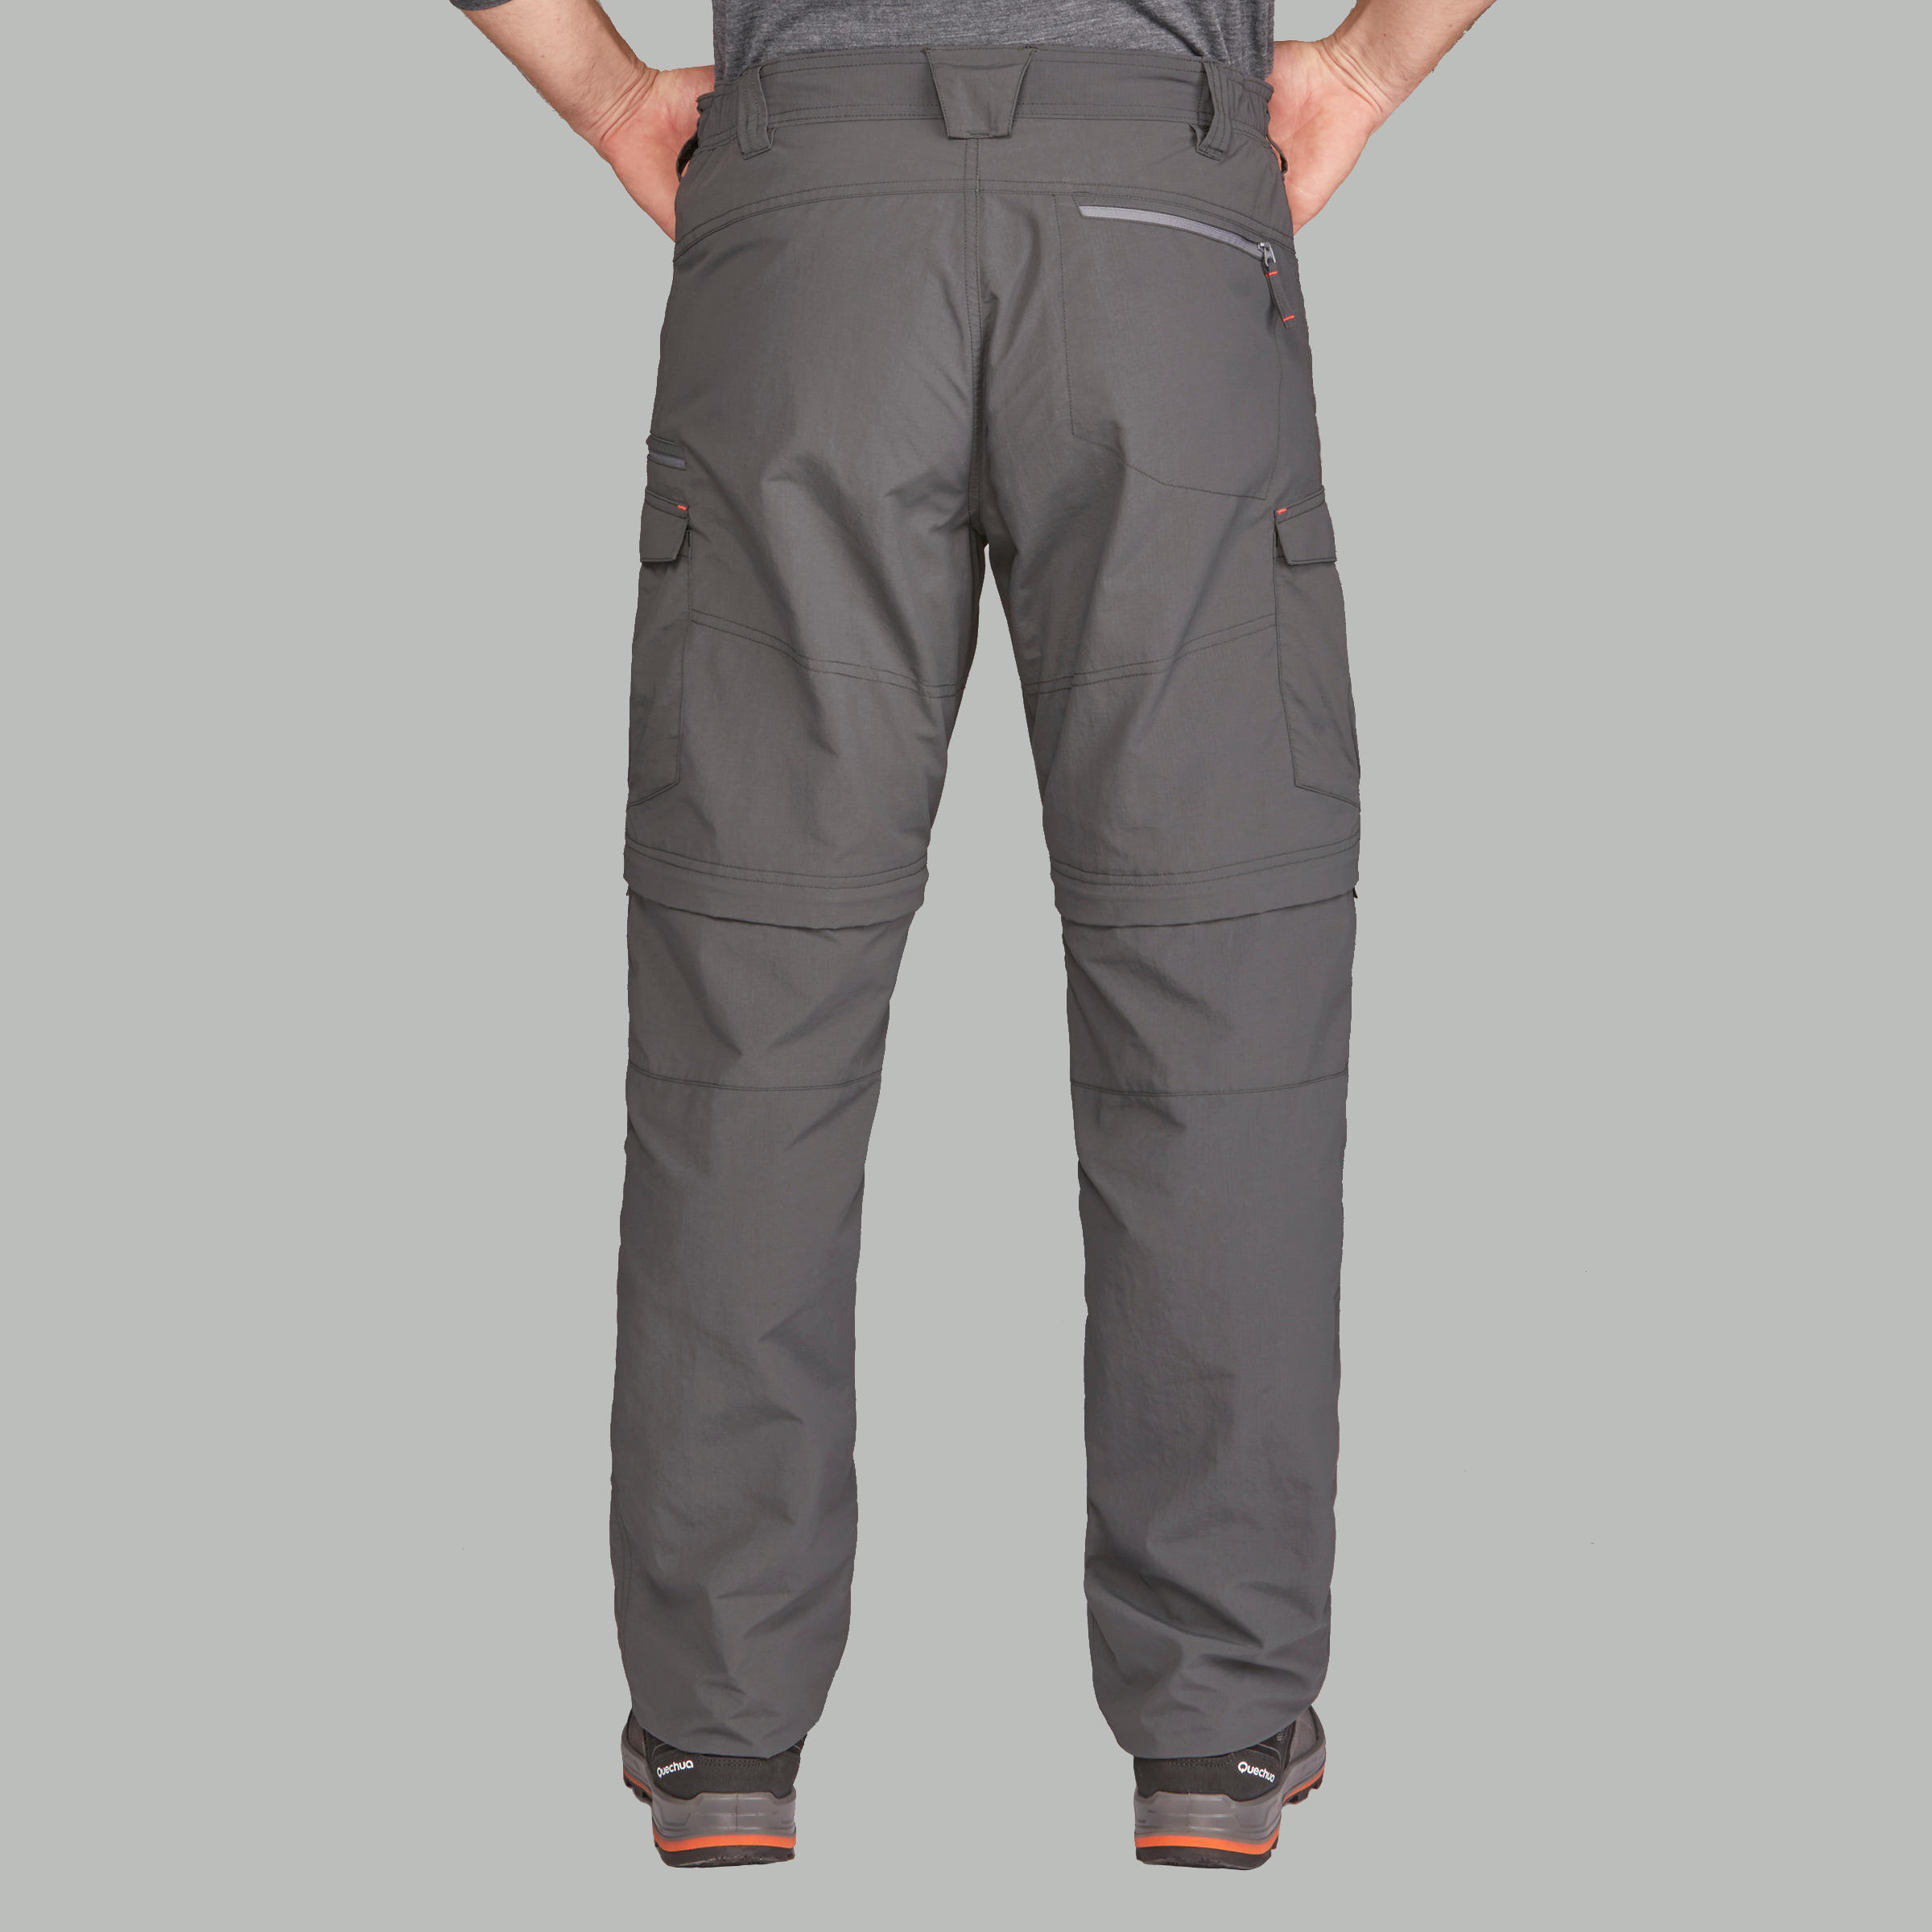 Quechua By Decathlon Women Grey Regular Fit Solid Hiking Trousers Price in  India, Full Specifications & Offers | DTashion.com